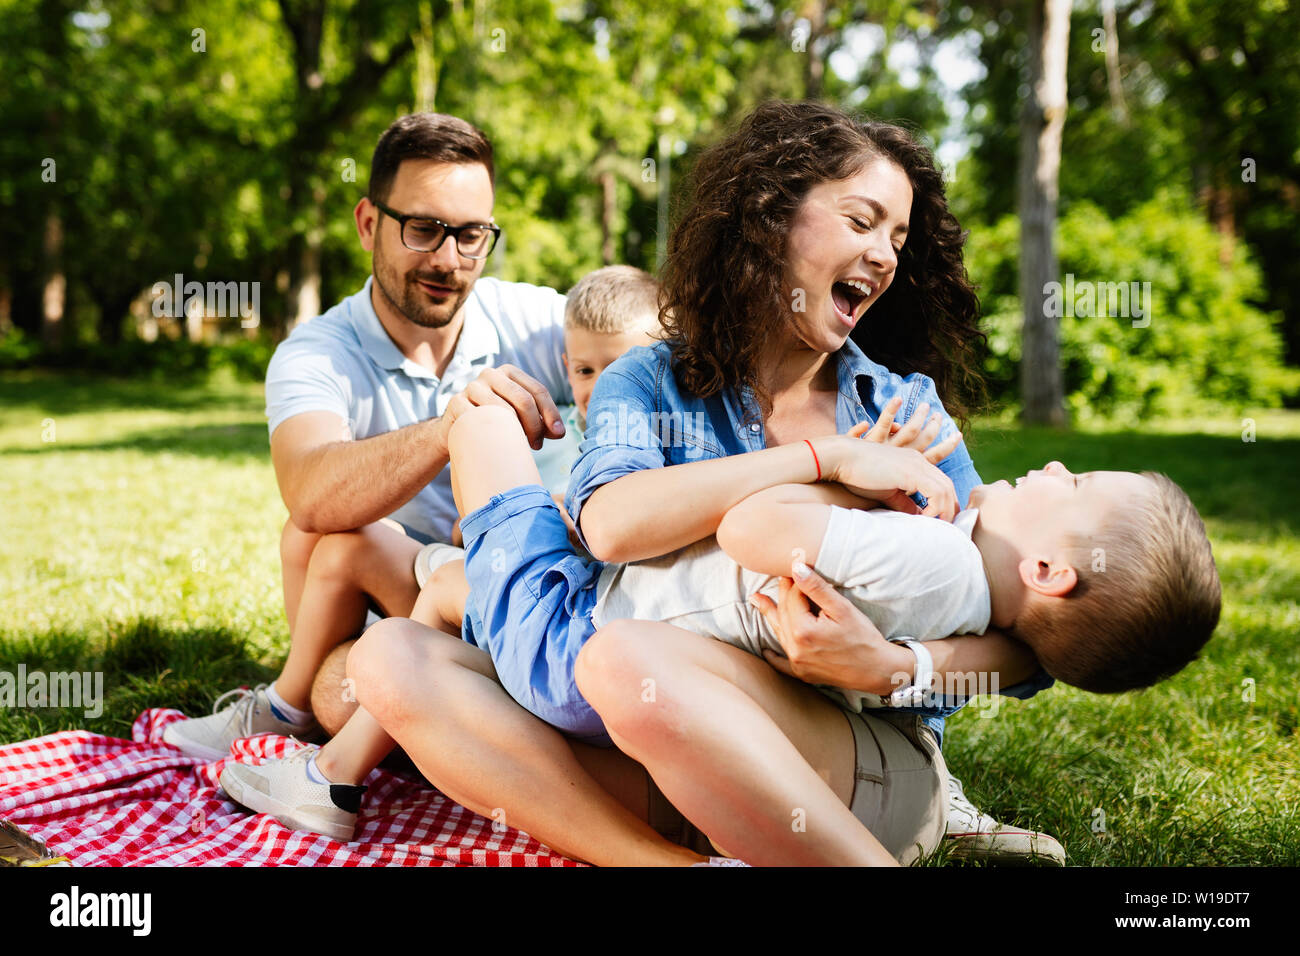 Young family with children having fun in nature Stock Photo